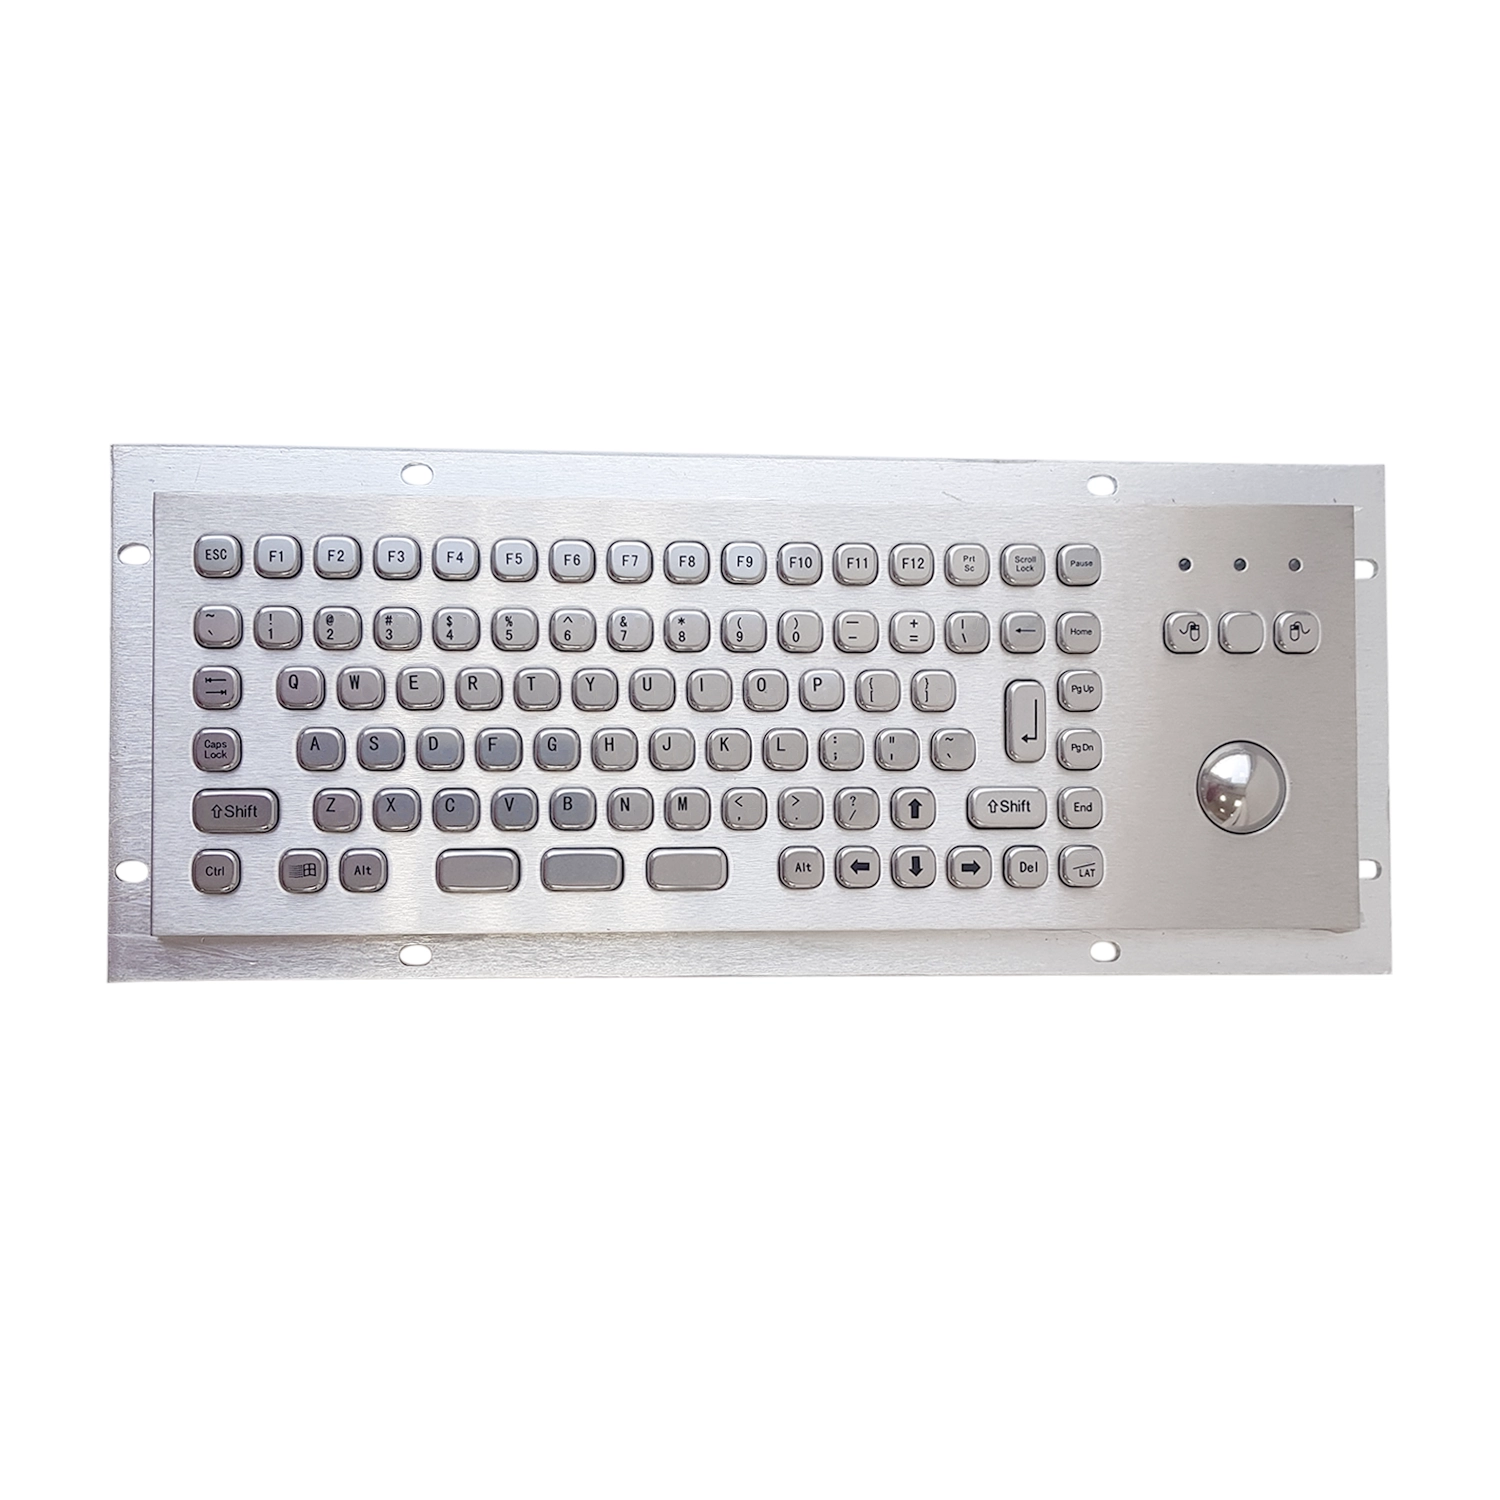 Rugged panel mount keyboard with trackball KB-000-NW0S0T5 MINI